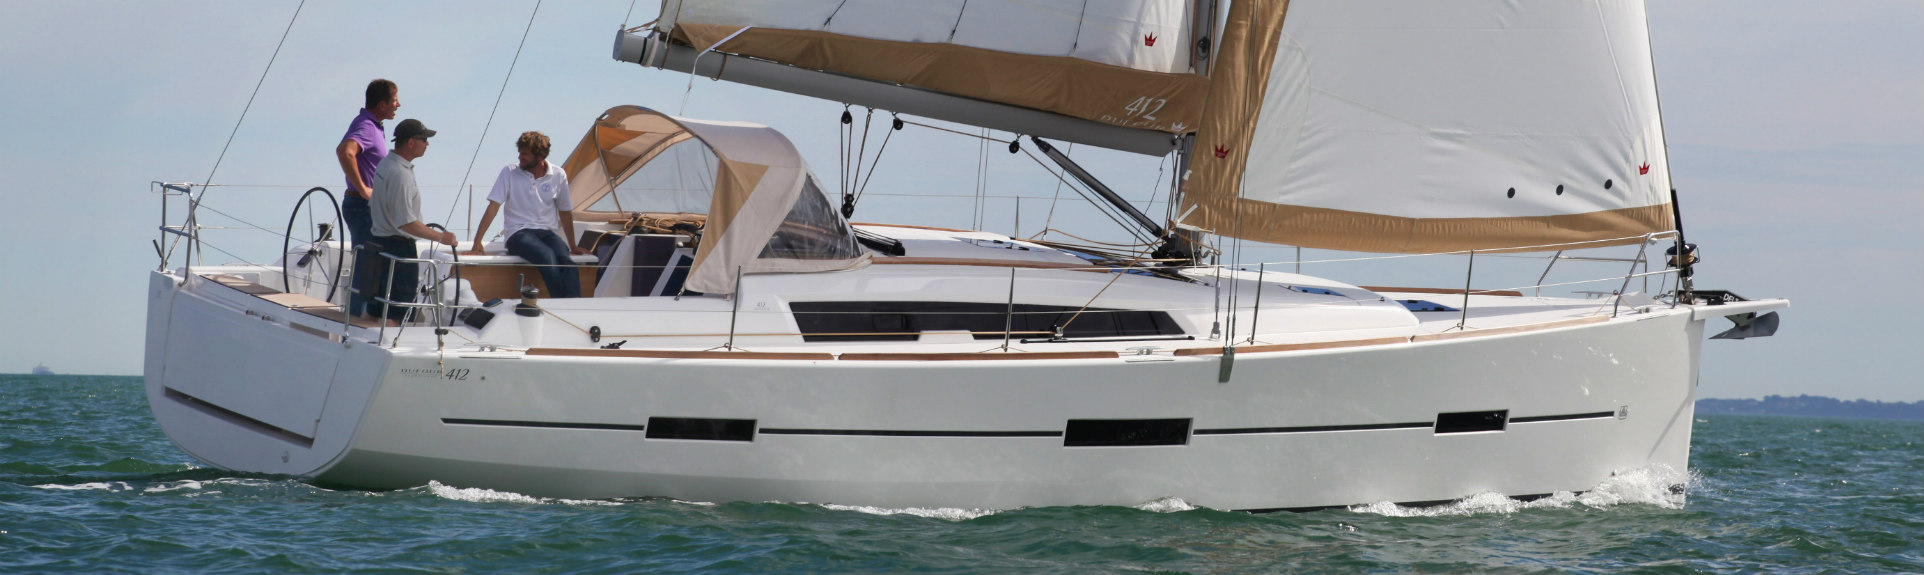 Boat Hire Solent Yacht Charters and Outdoor Activities